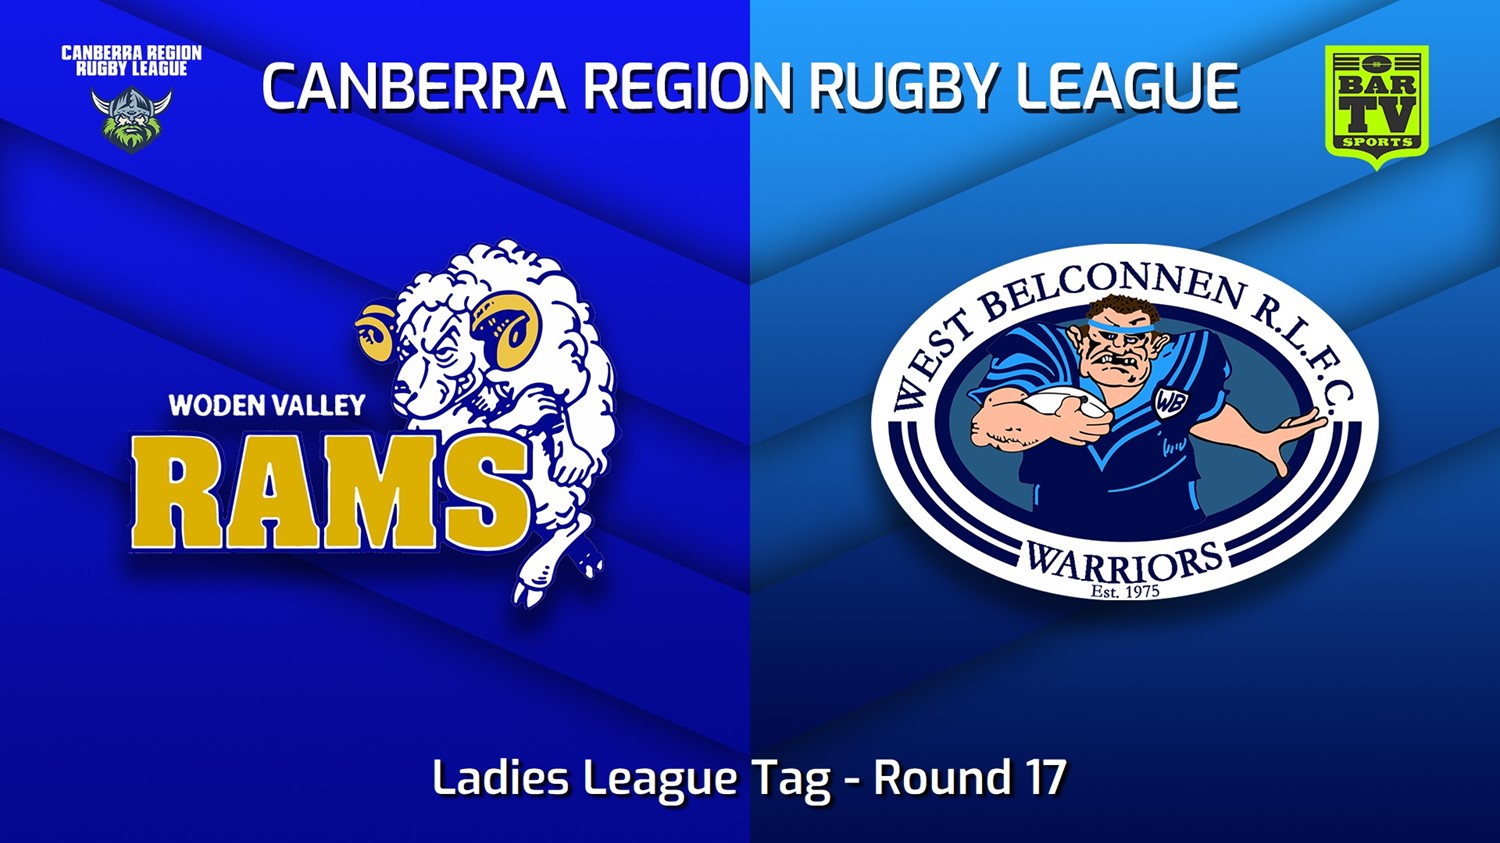 230819-Canberra Round 17 - Ladies League Tag - Woden Valley Rams v West Belconnen Warriors Slate Image